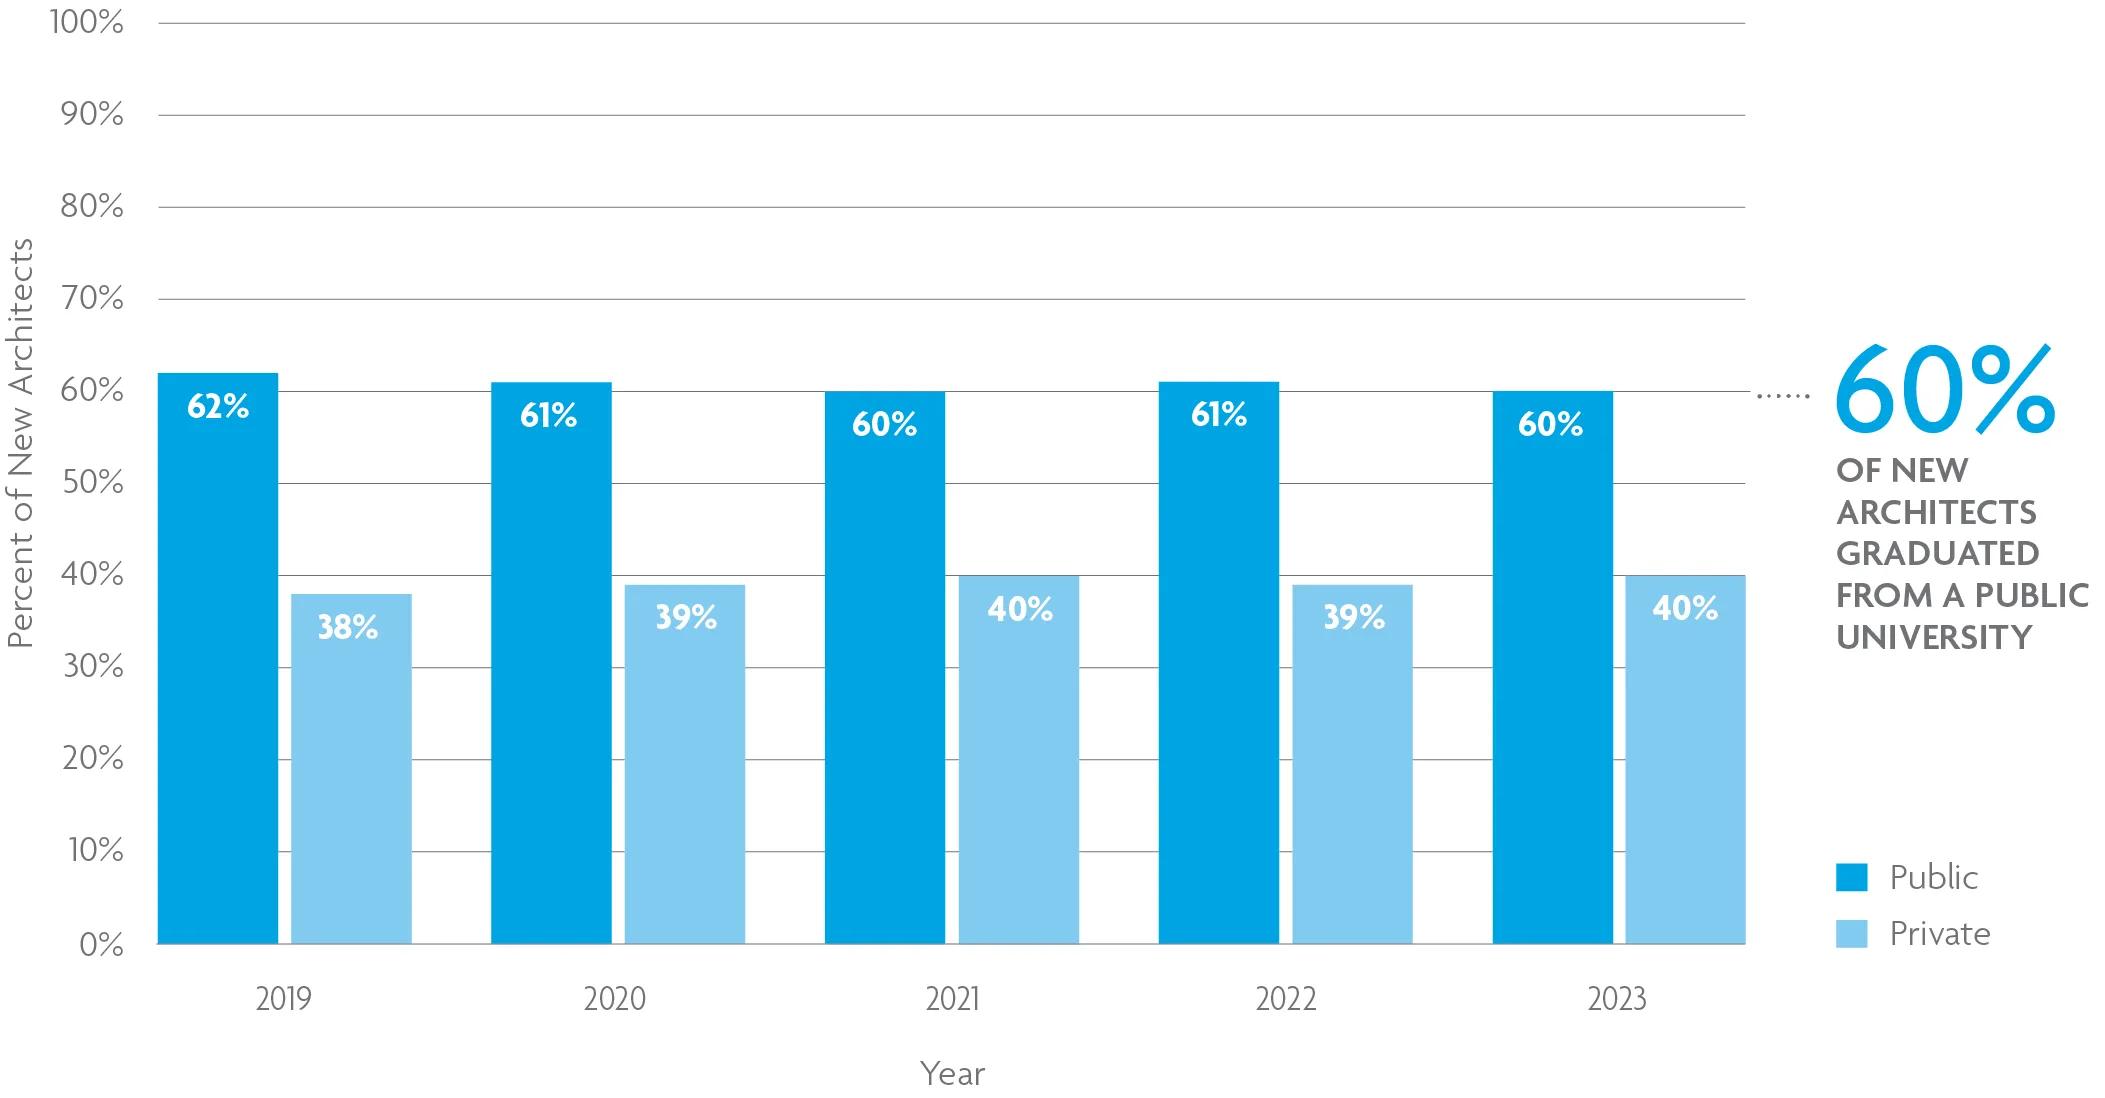 A grouped bar chart shows that 60% of new architects in 2023 graduated from a public university. For help with data accessibility, contact communications@ncarb.org.